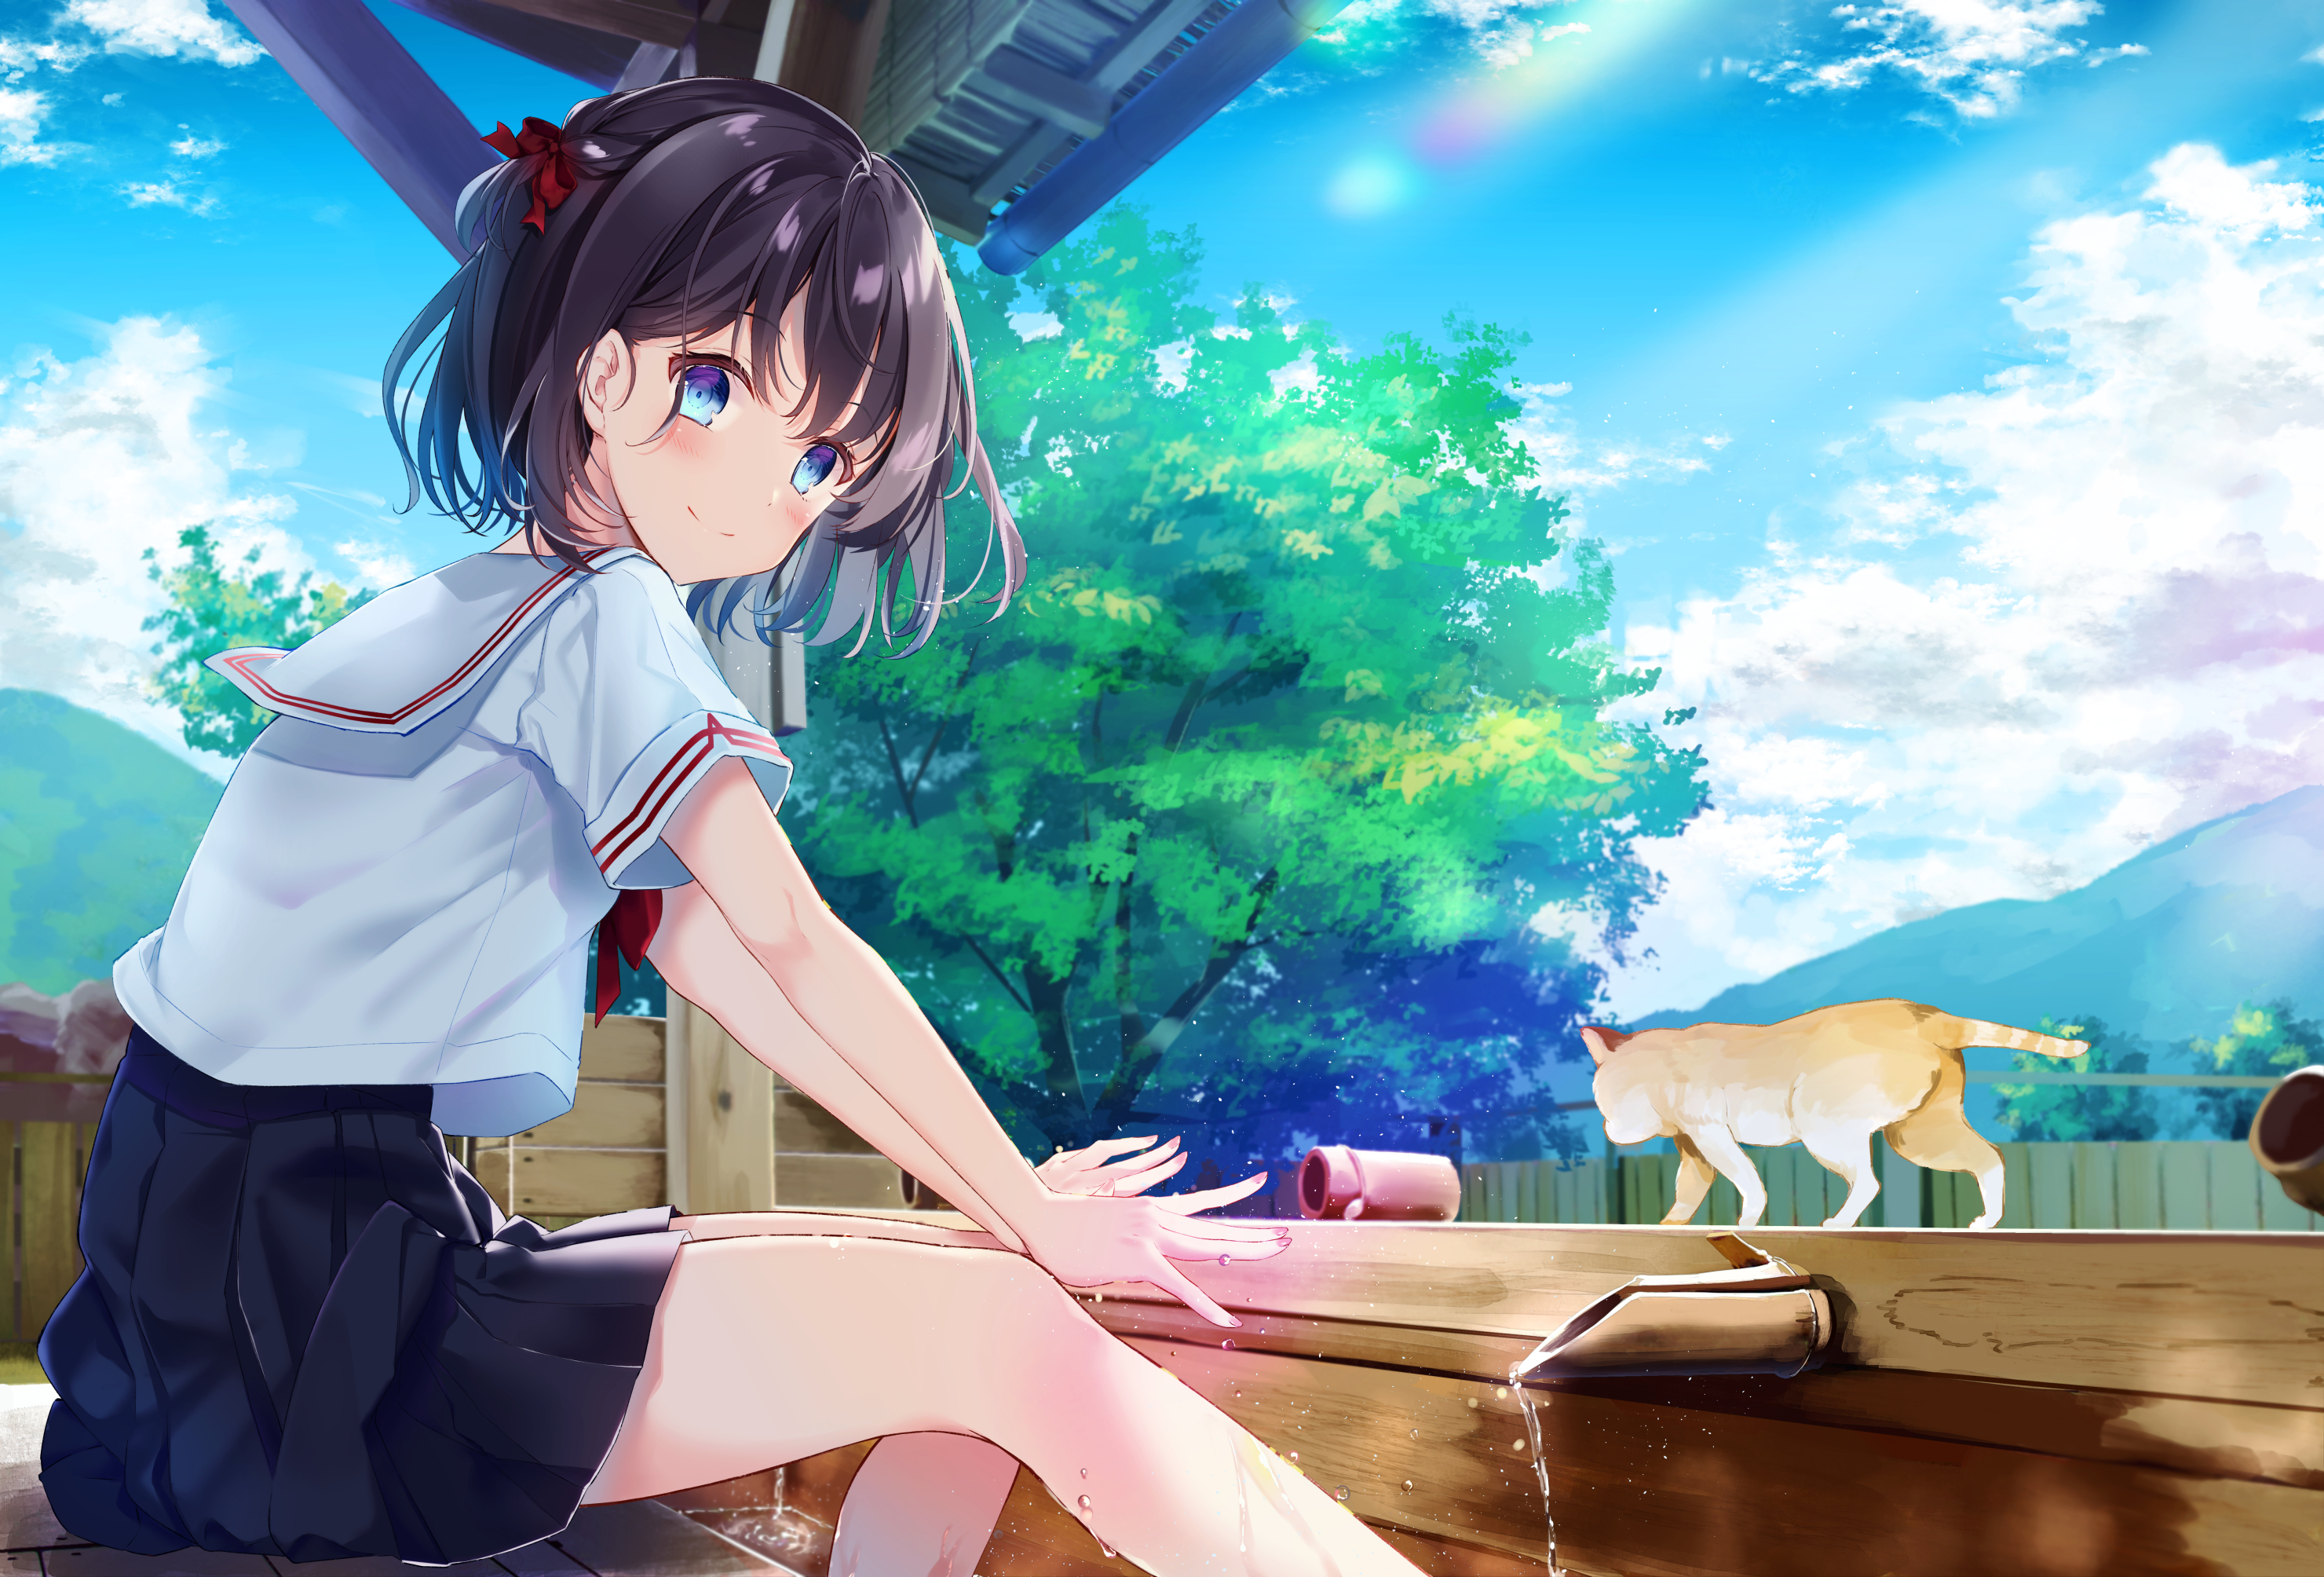 Anime 2960x2008 anime cats water sky landscape trees